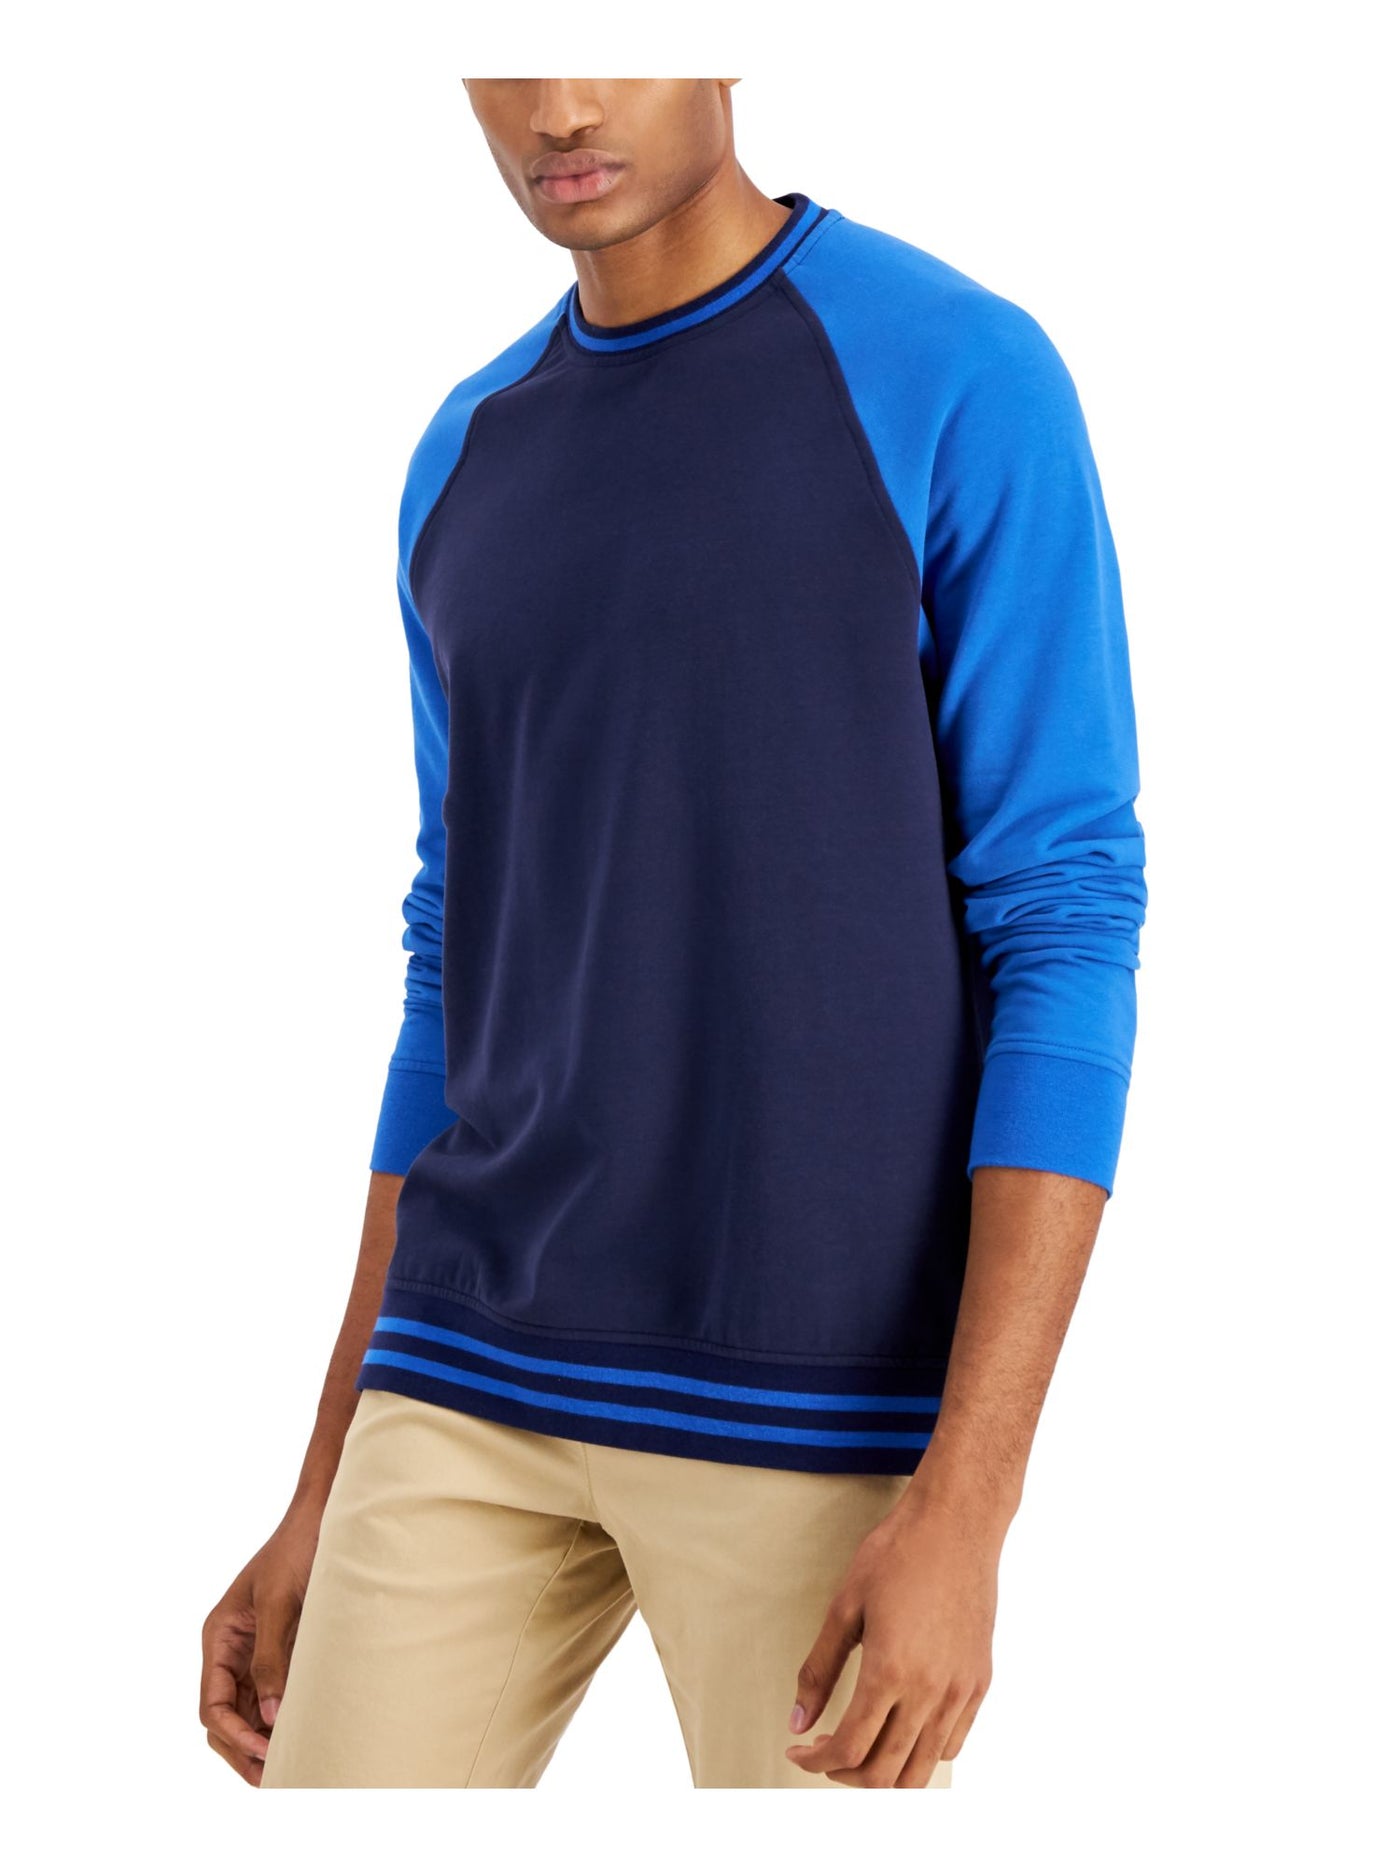 CLUBROOM Mens Blue Color Block Crew Neck Stretch Pullover Sweater S